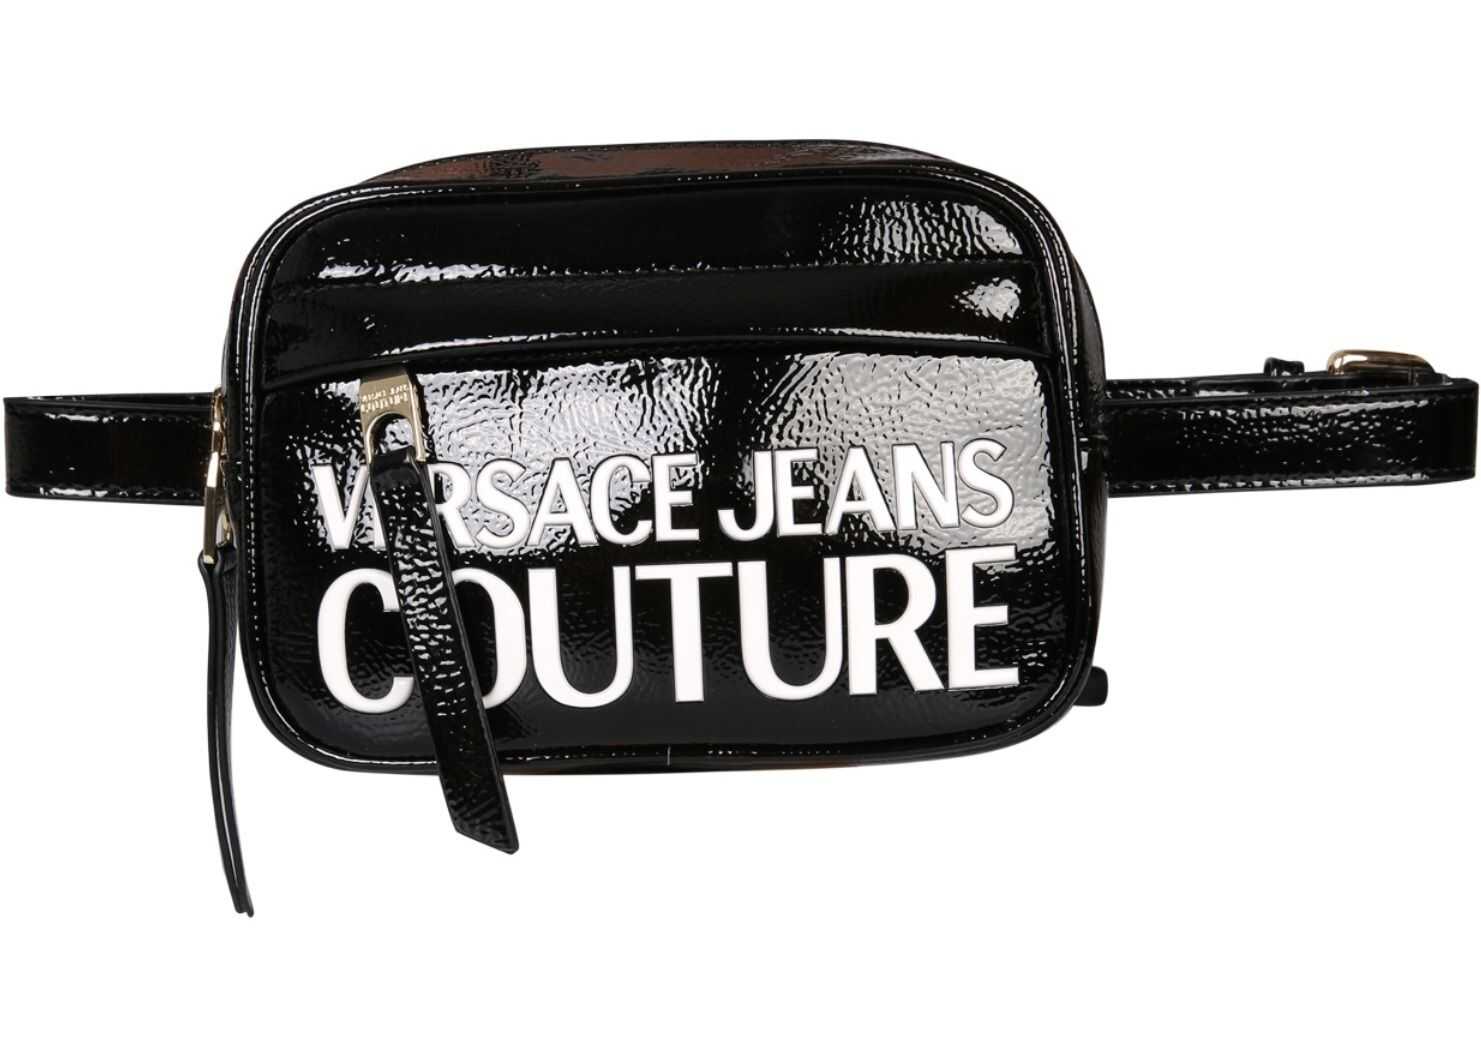 Versace Jeans Couture Belt Bag With Logo BLACK